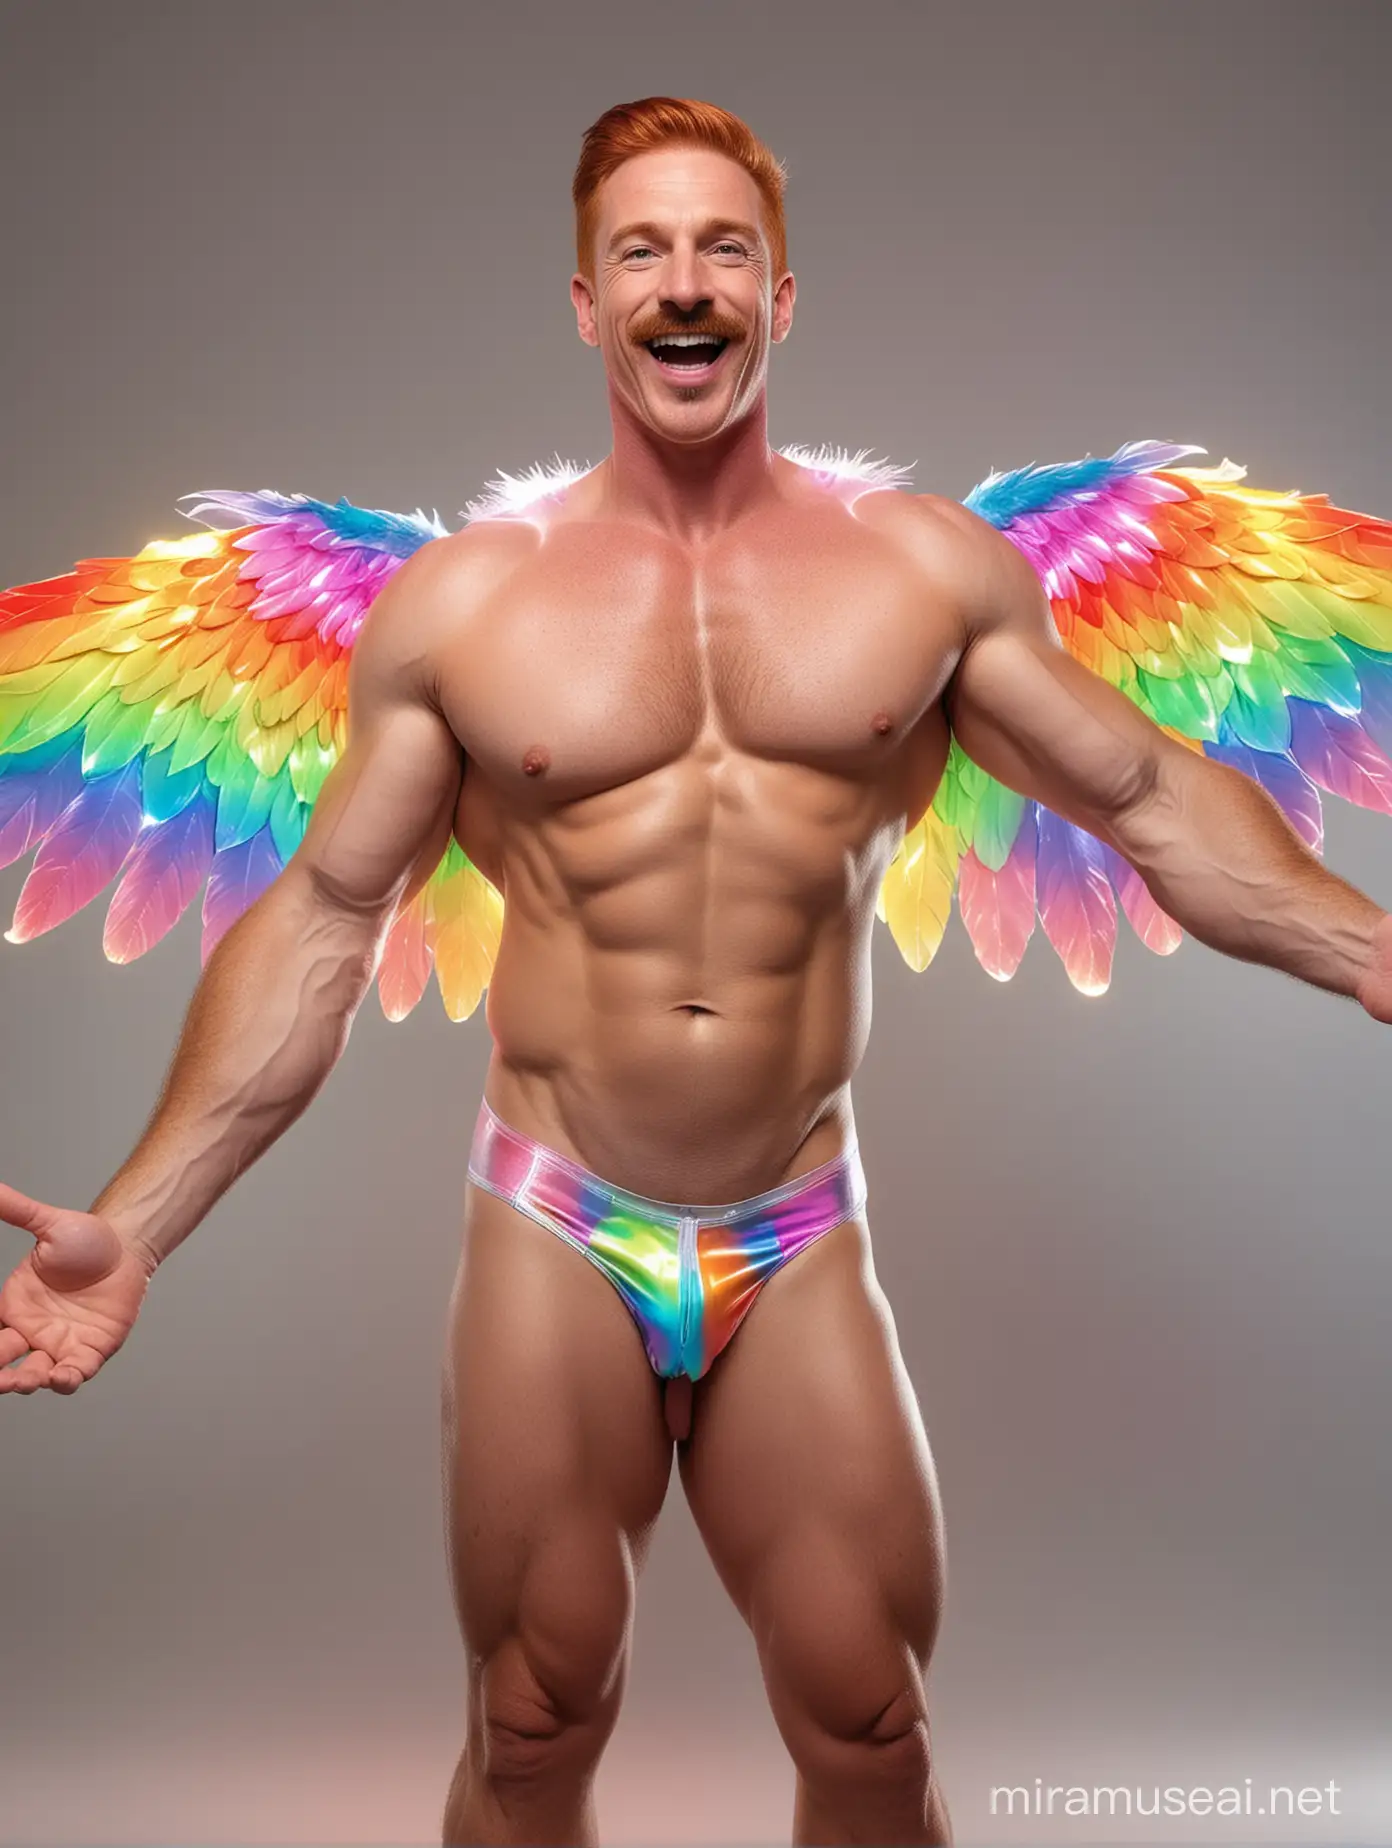 Muscular Redhead Bodybuilder Flexing in Rainbow Jacket with Eagle Wings